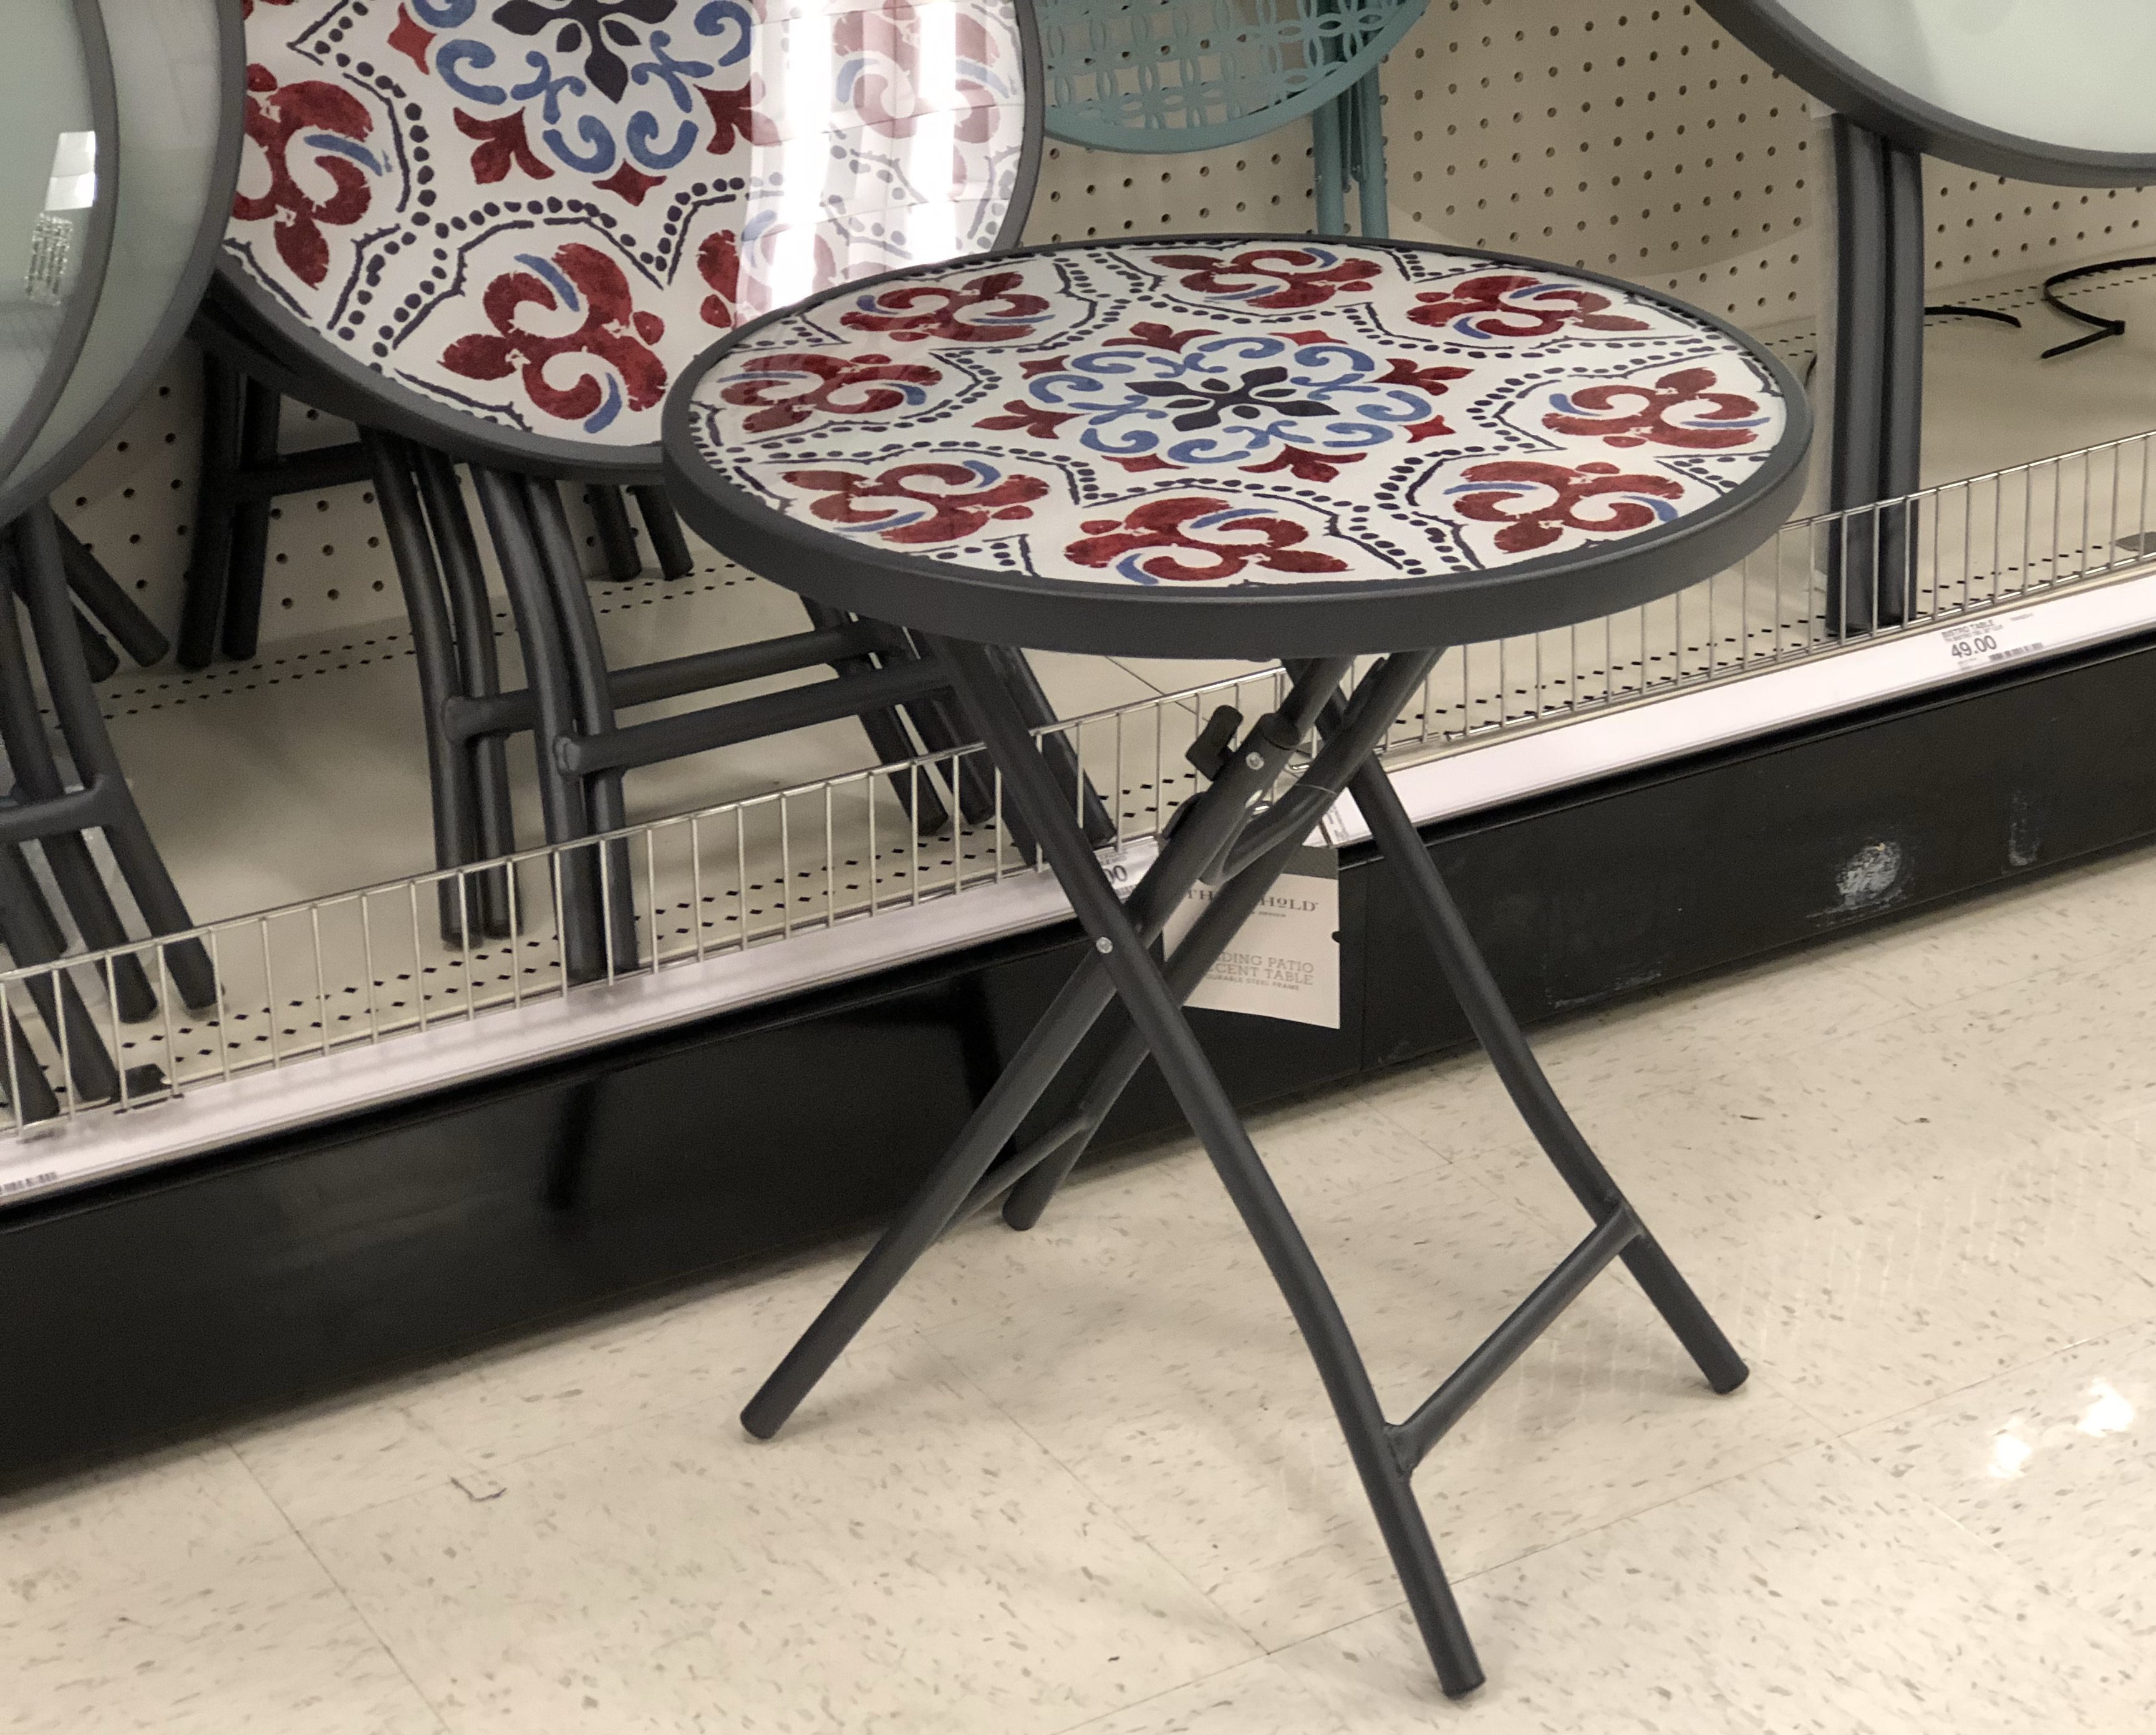 target smith hawken piece patio bistro set shipped threshold glass folding accent table regularly use code ping the off garden furniture and decor cartwheel pier imports outdoor